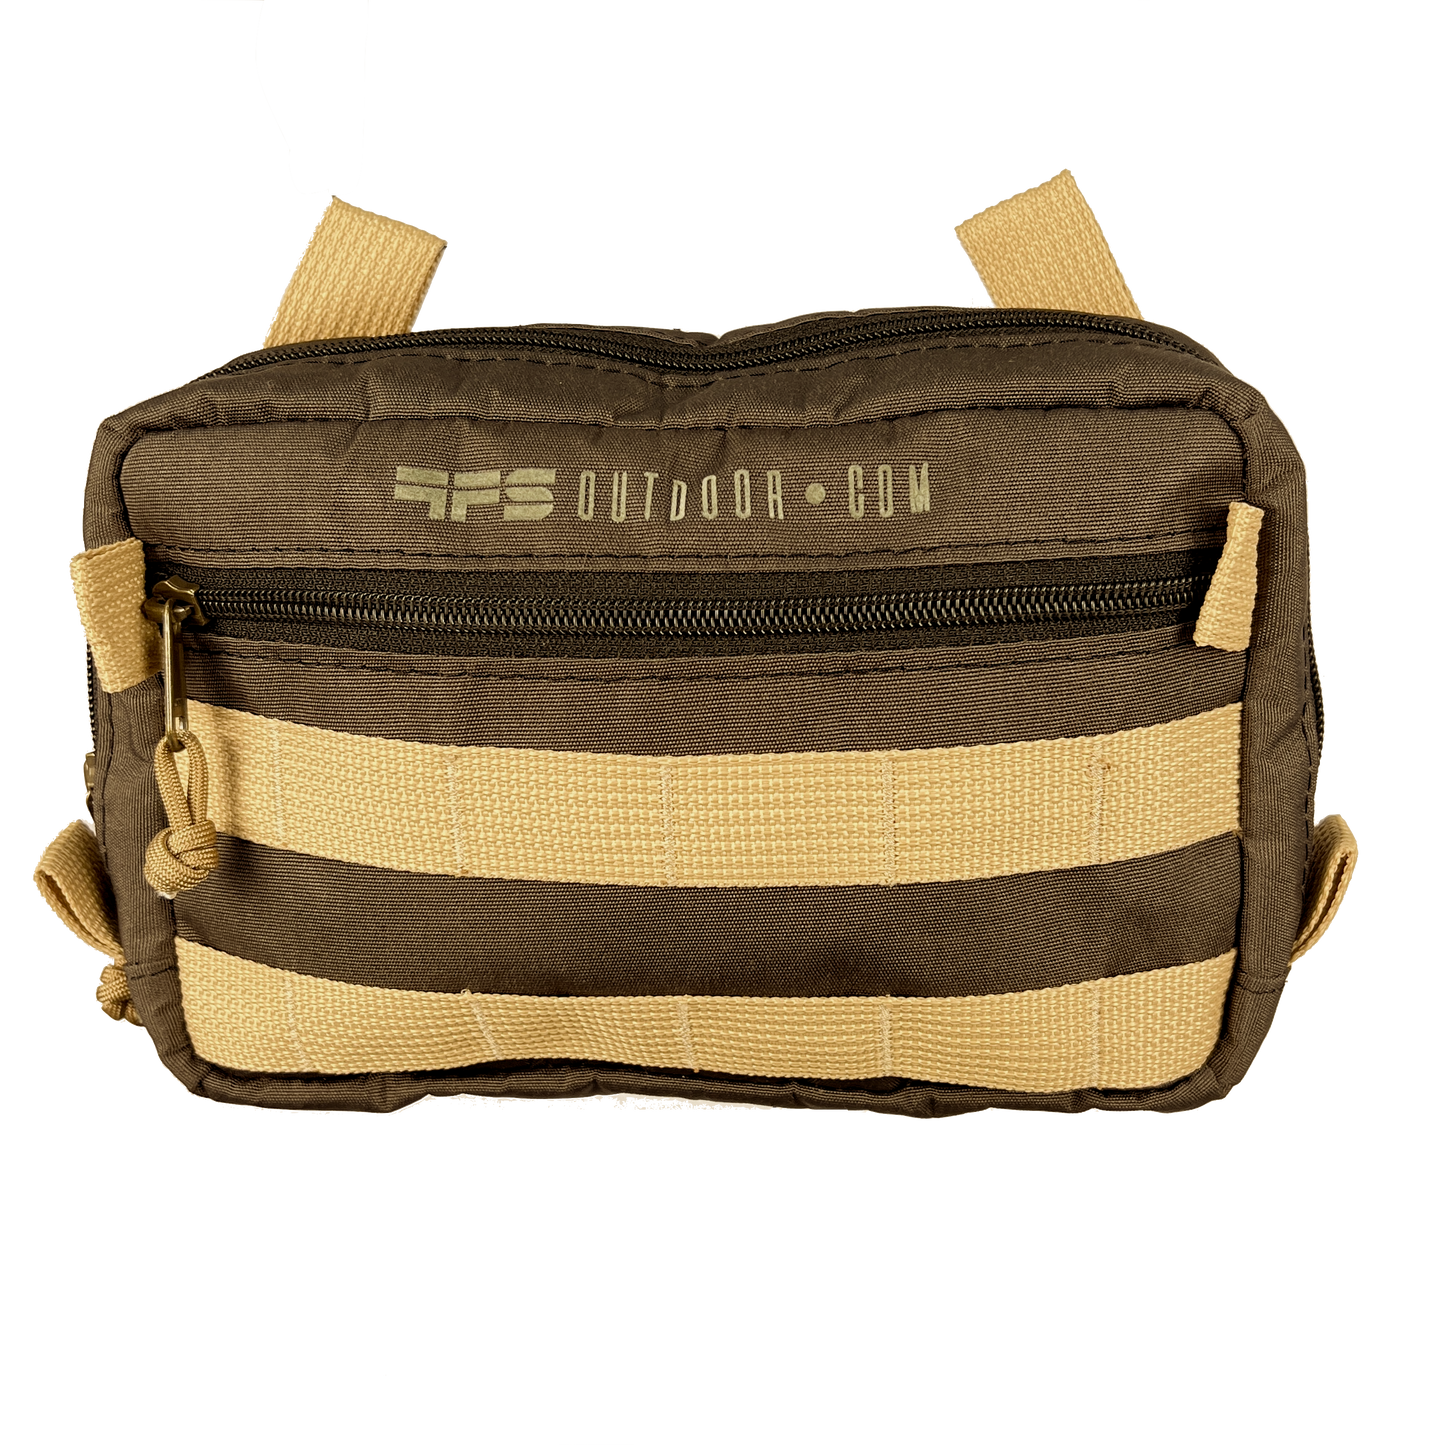 Tactical chest mount gear bag and fishing and hiking bag south Africa